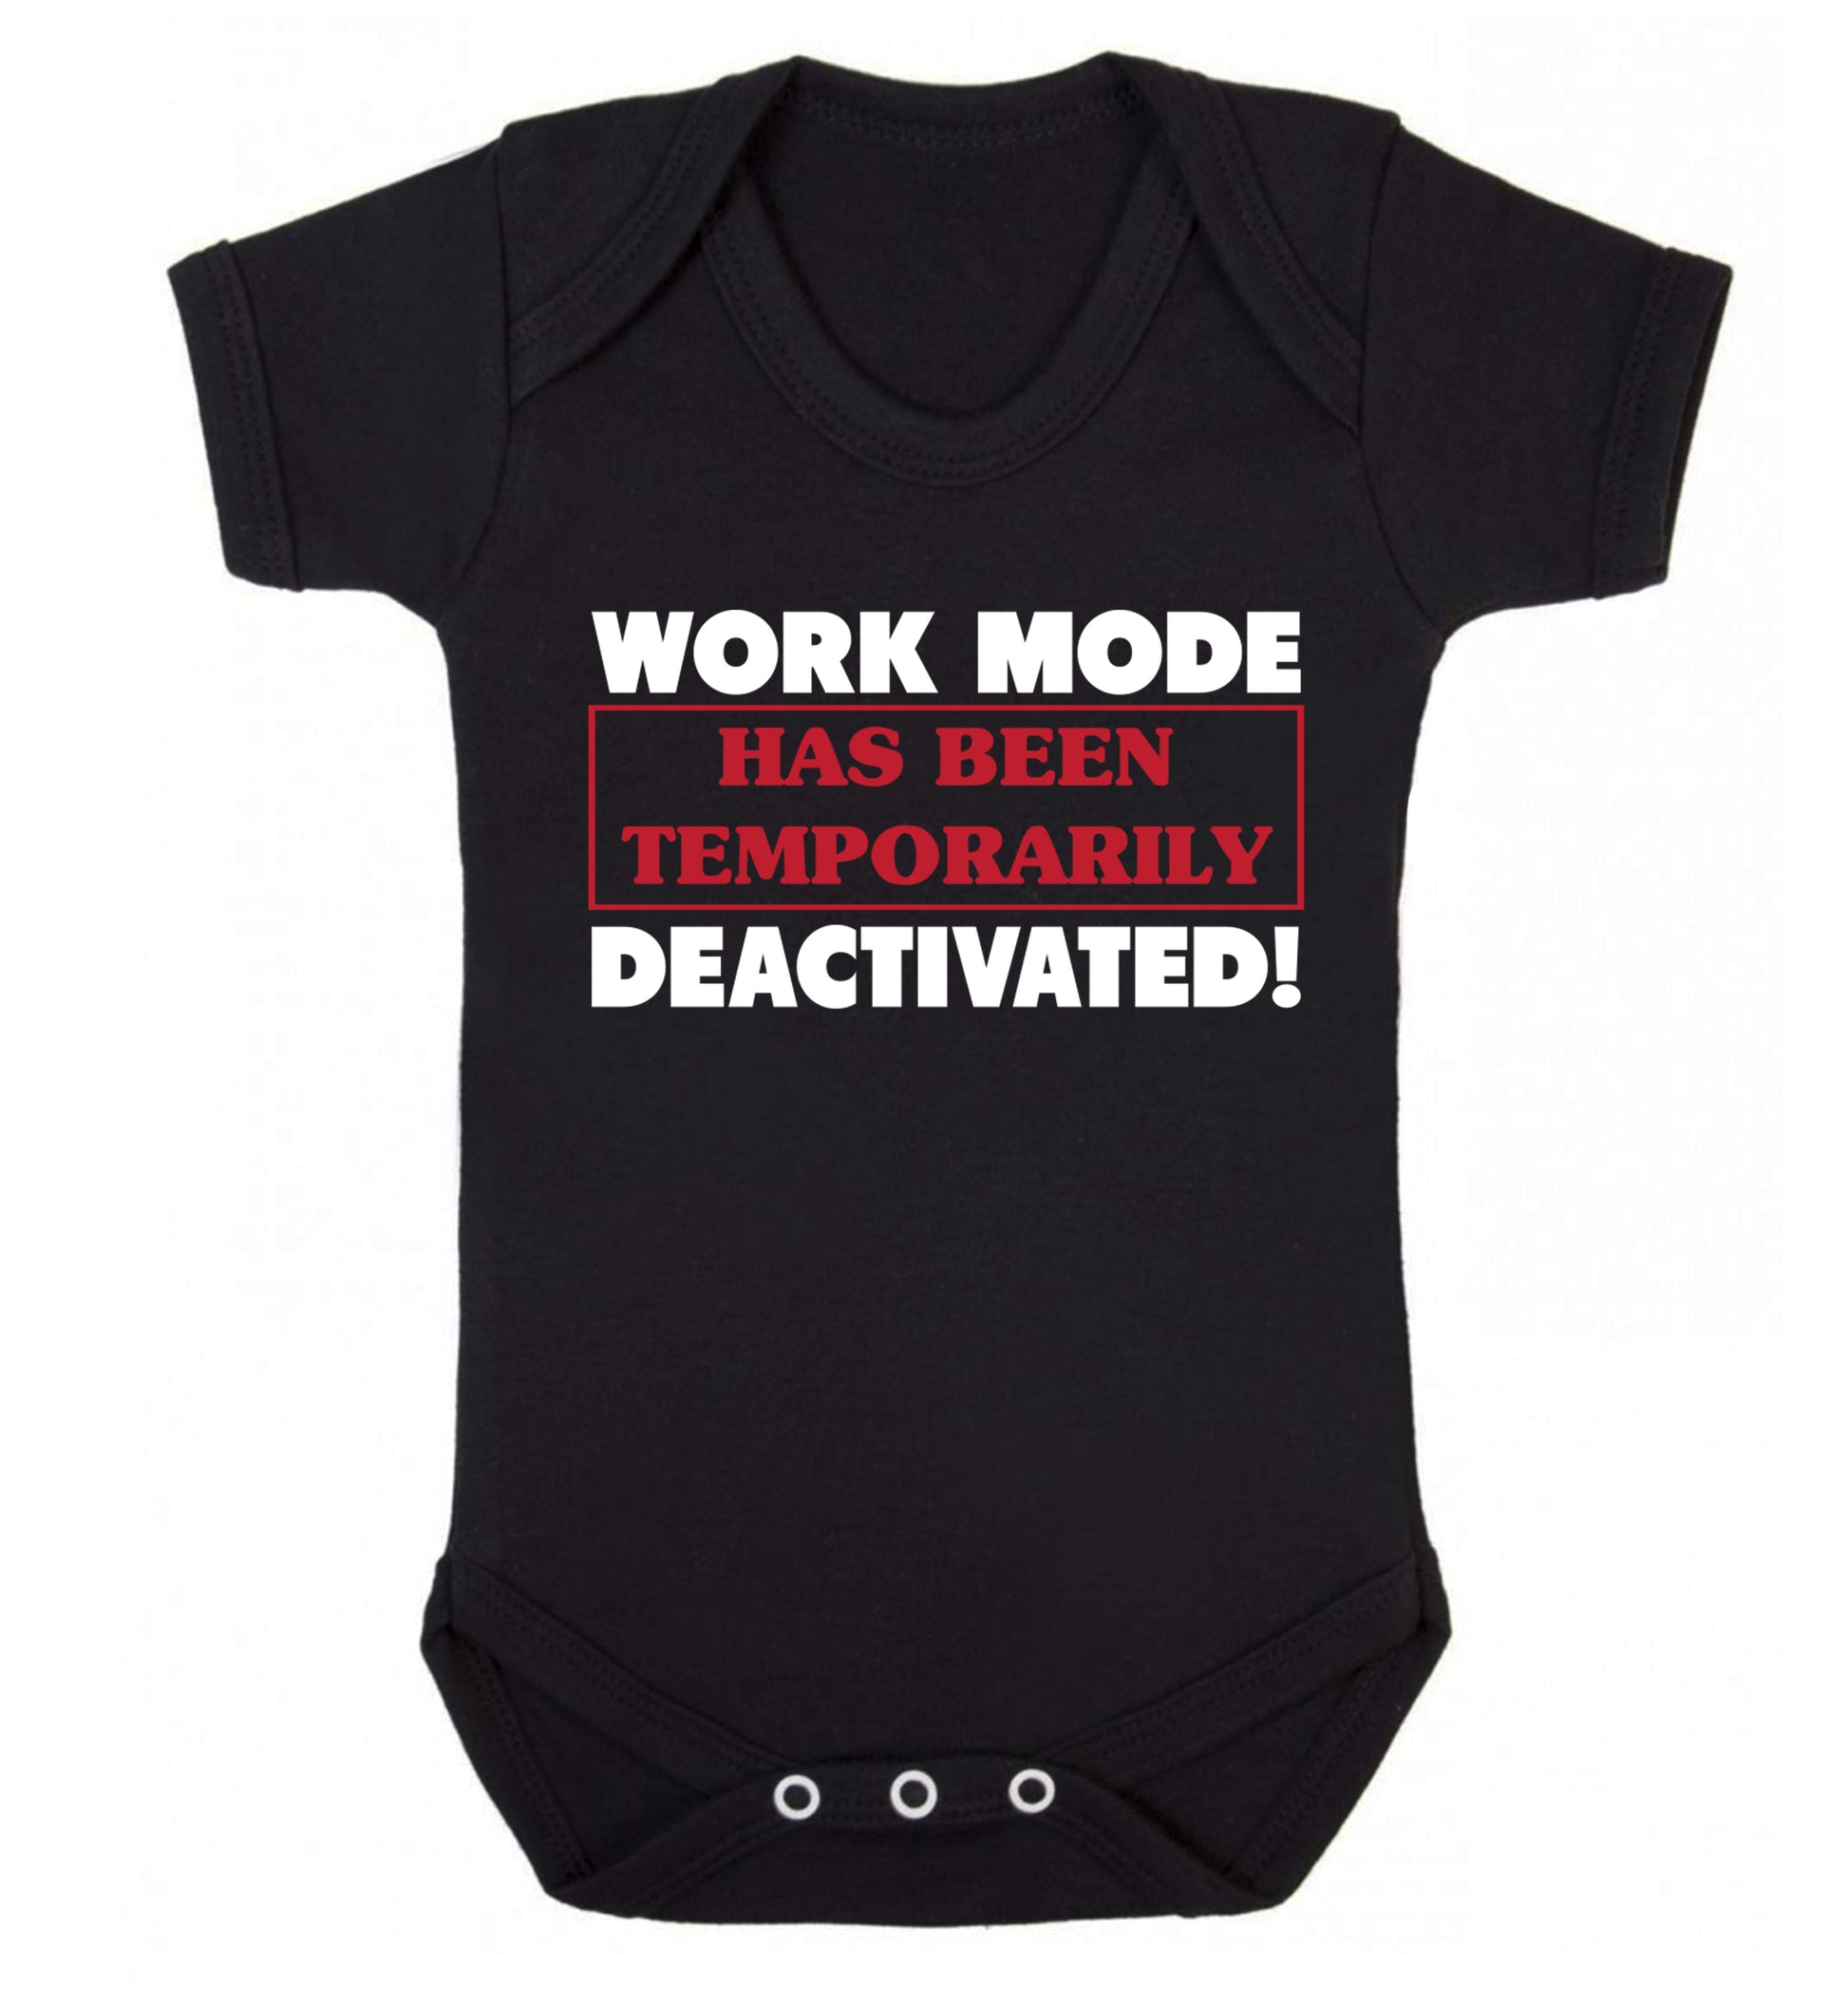 Work mode has now been temporarily deactivated Baby Vest black 18-24 months